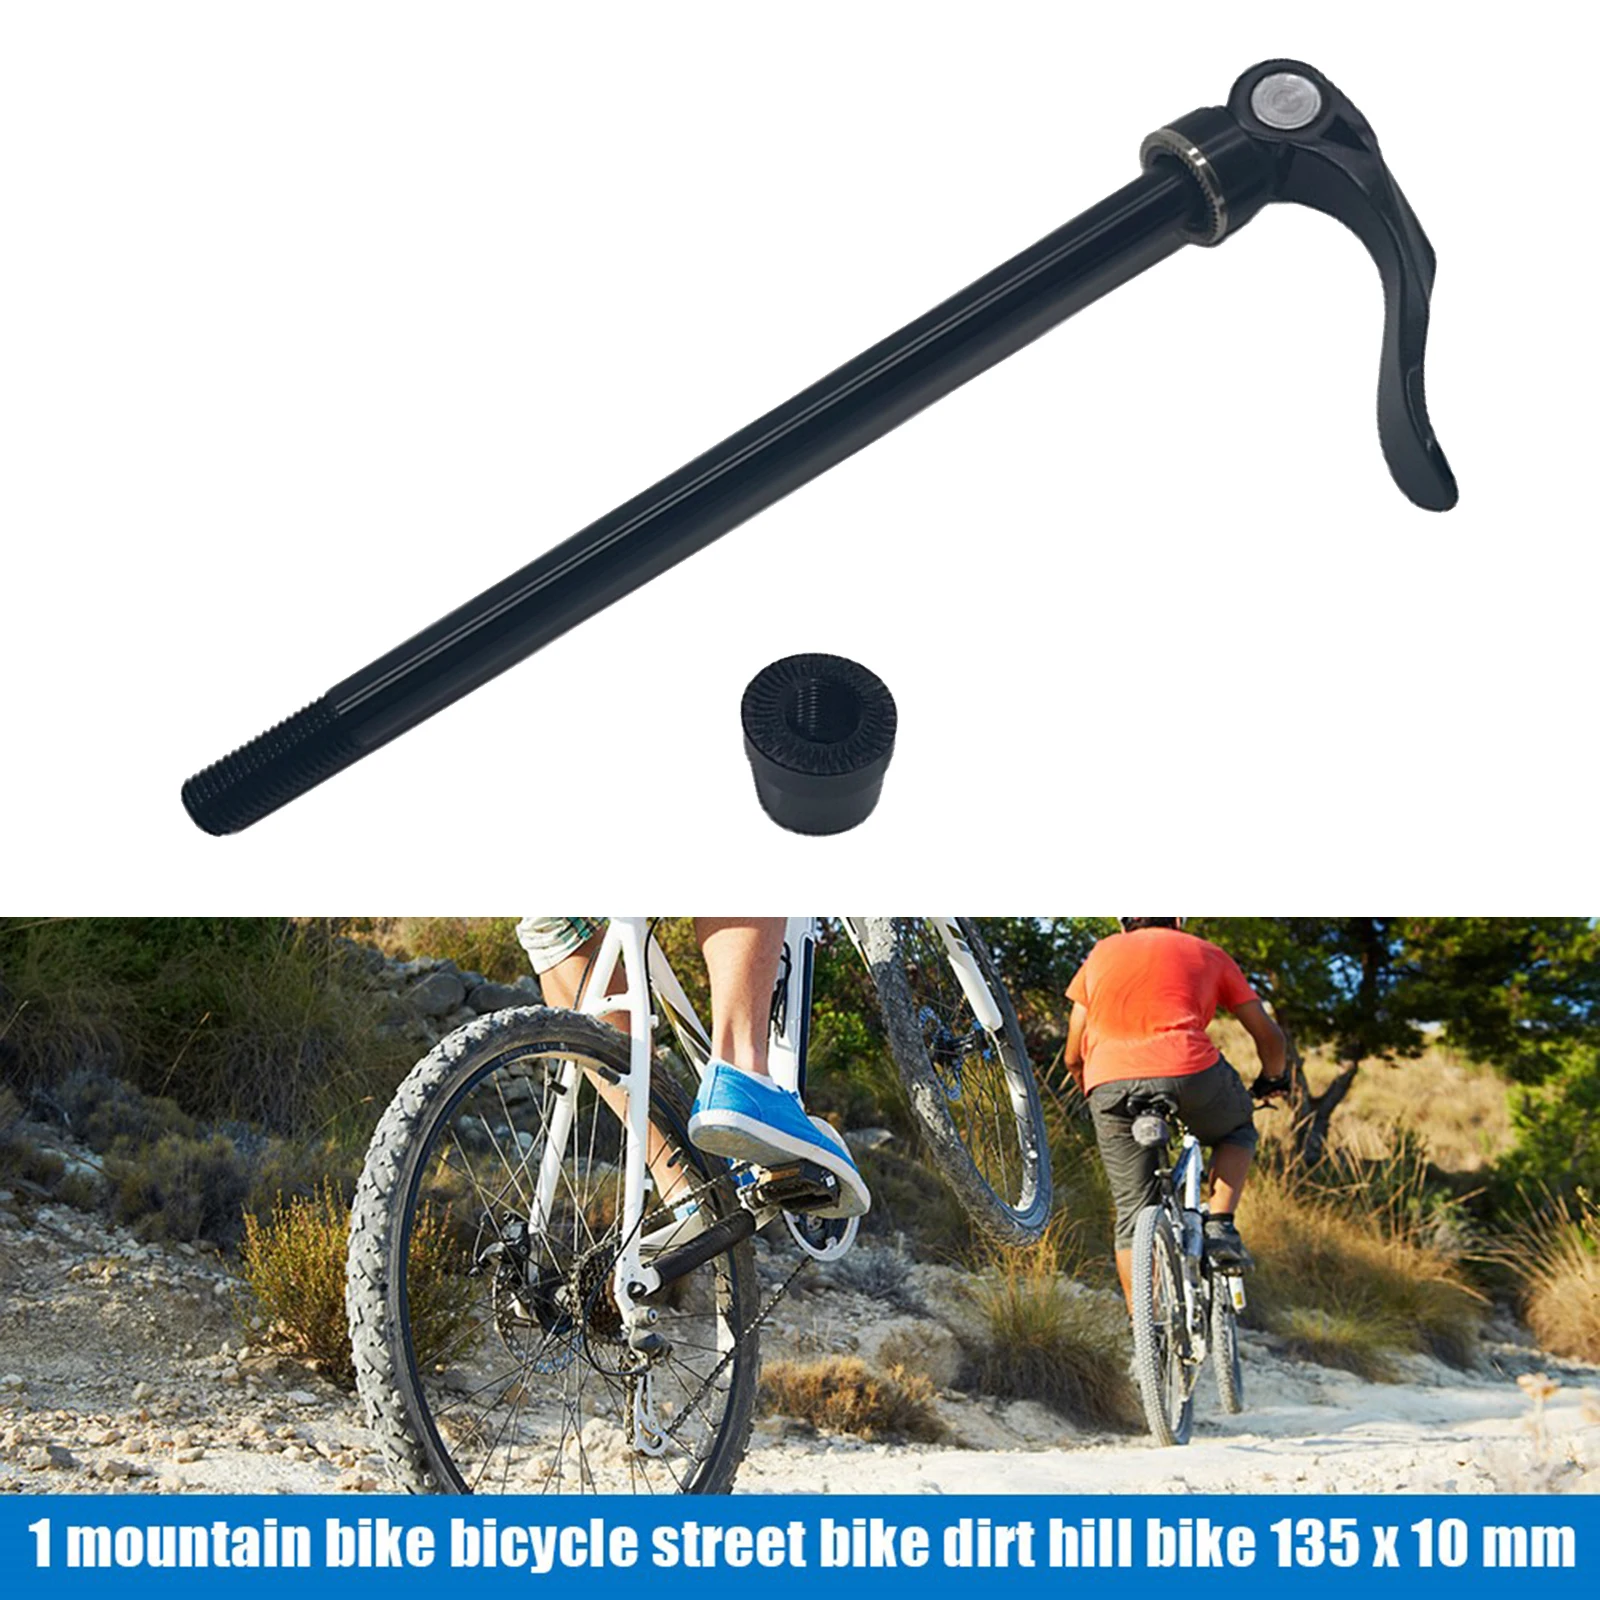 MTB Quick Release Rear Wheel Skewer for Trainer Bicycle Mountain Bike Back Wheel 135x10mm Hub Axle for Road MTB DH BMX